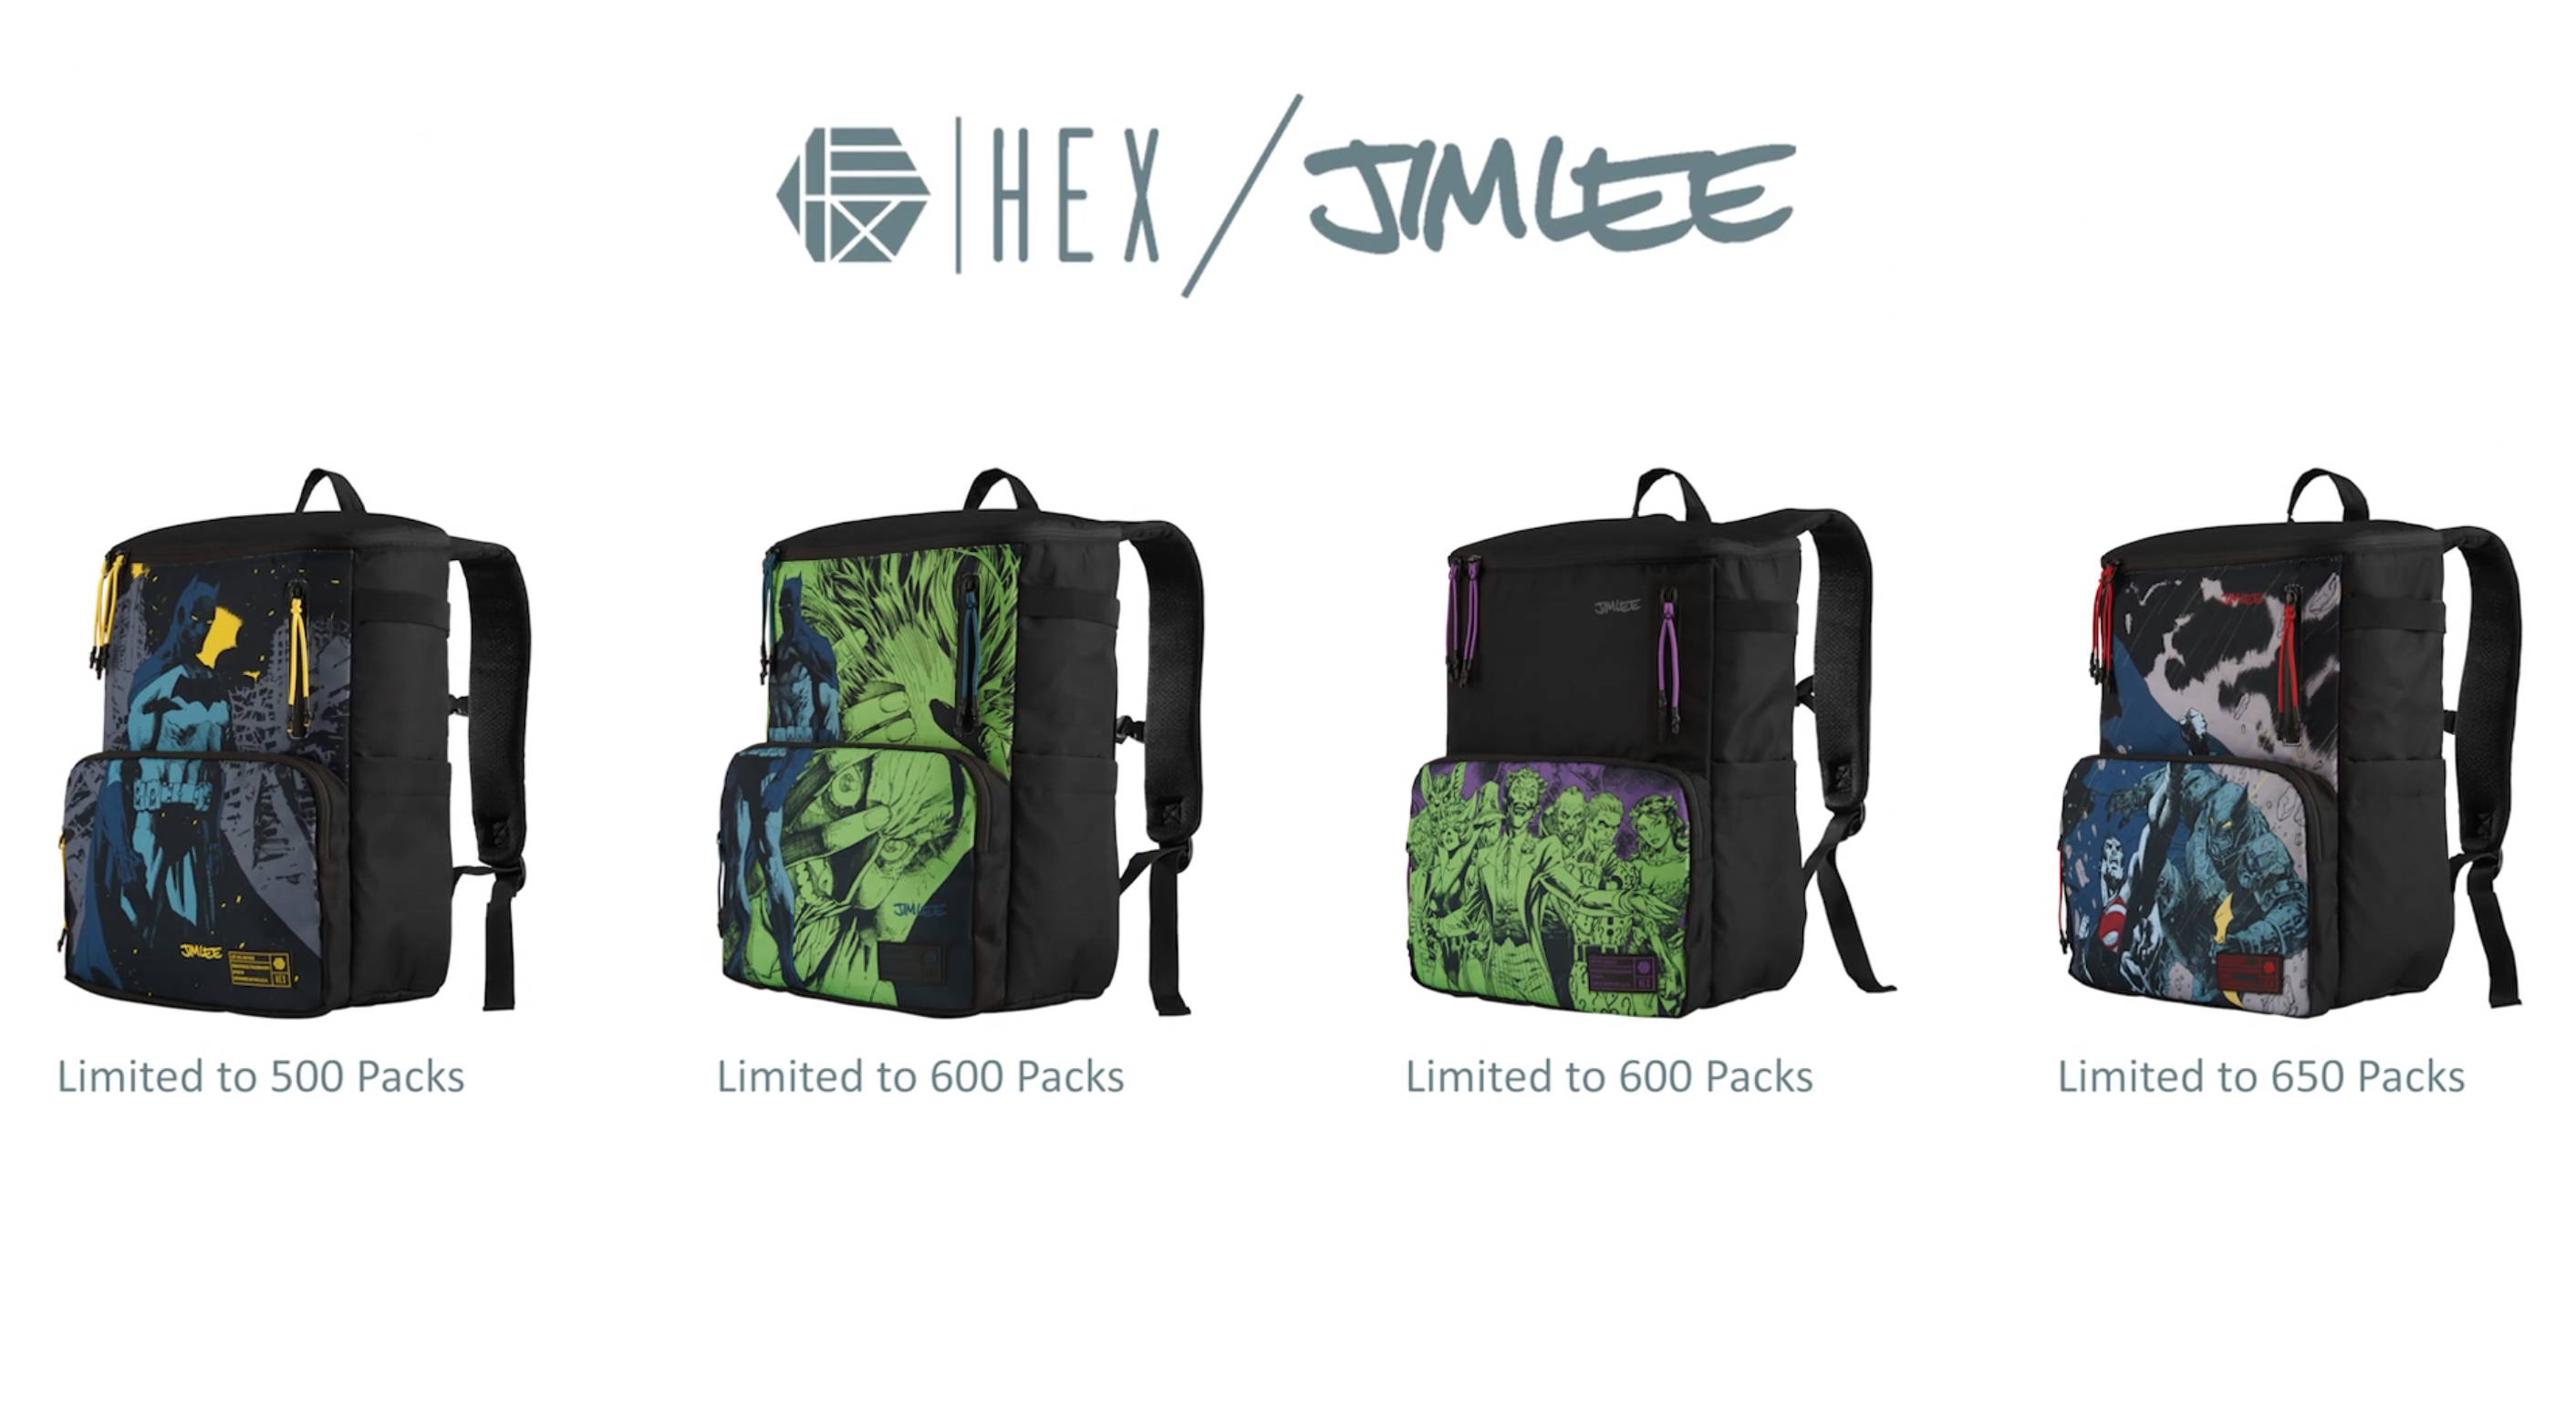 HEX x Jim Lee Backpack Collection